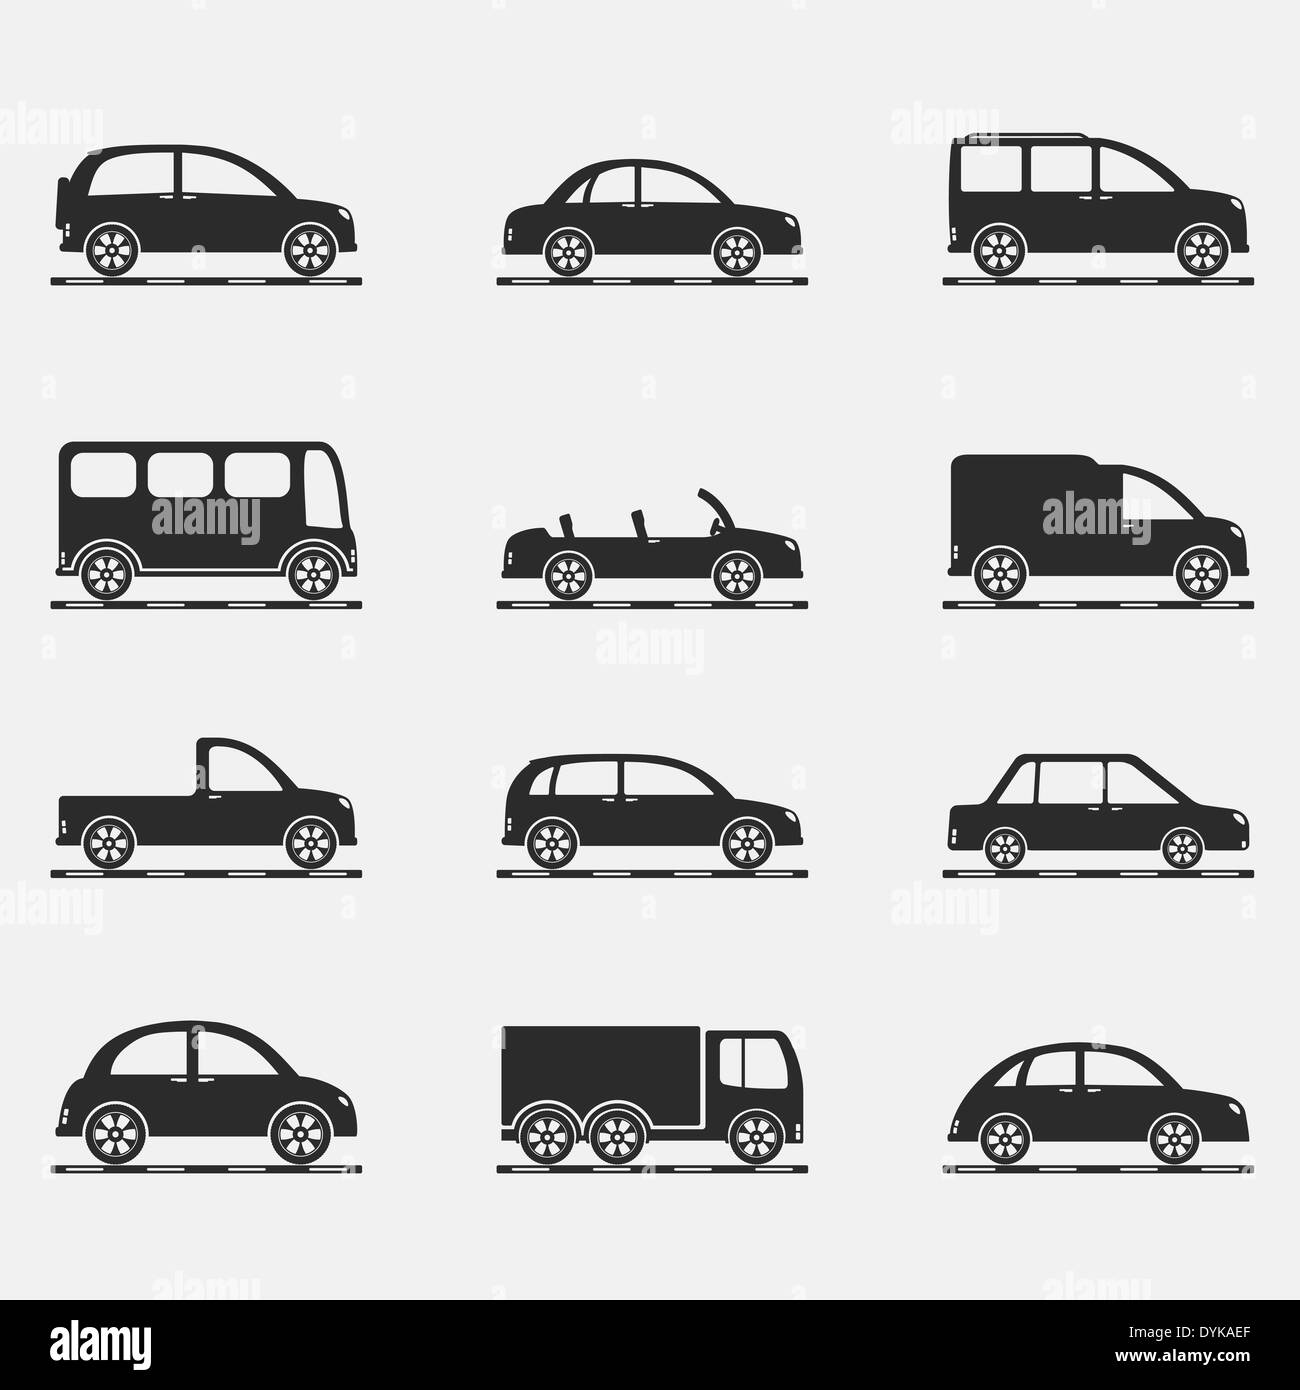 Set of icons of different cars Stock Photo